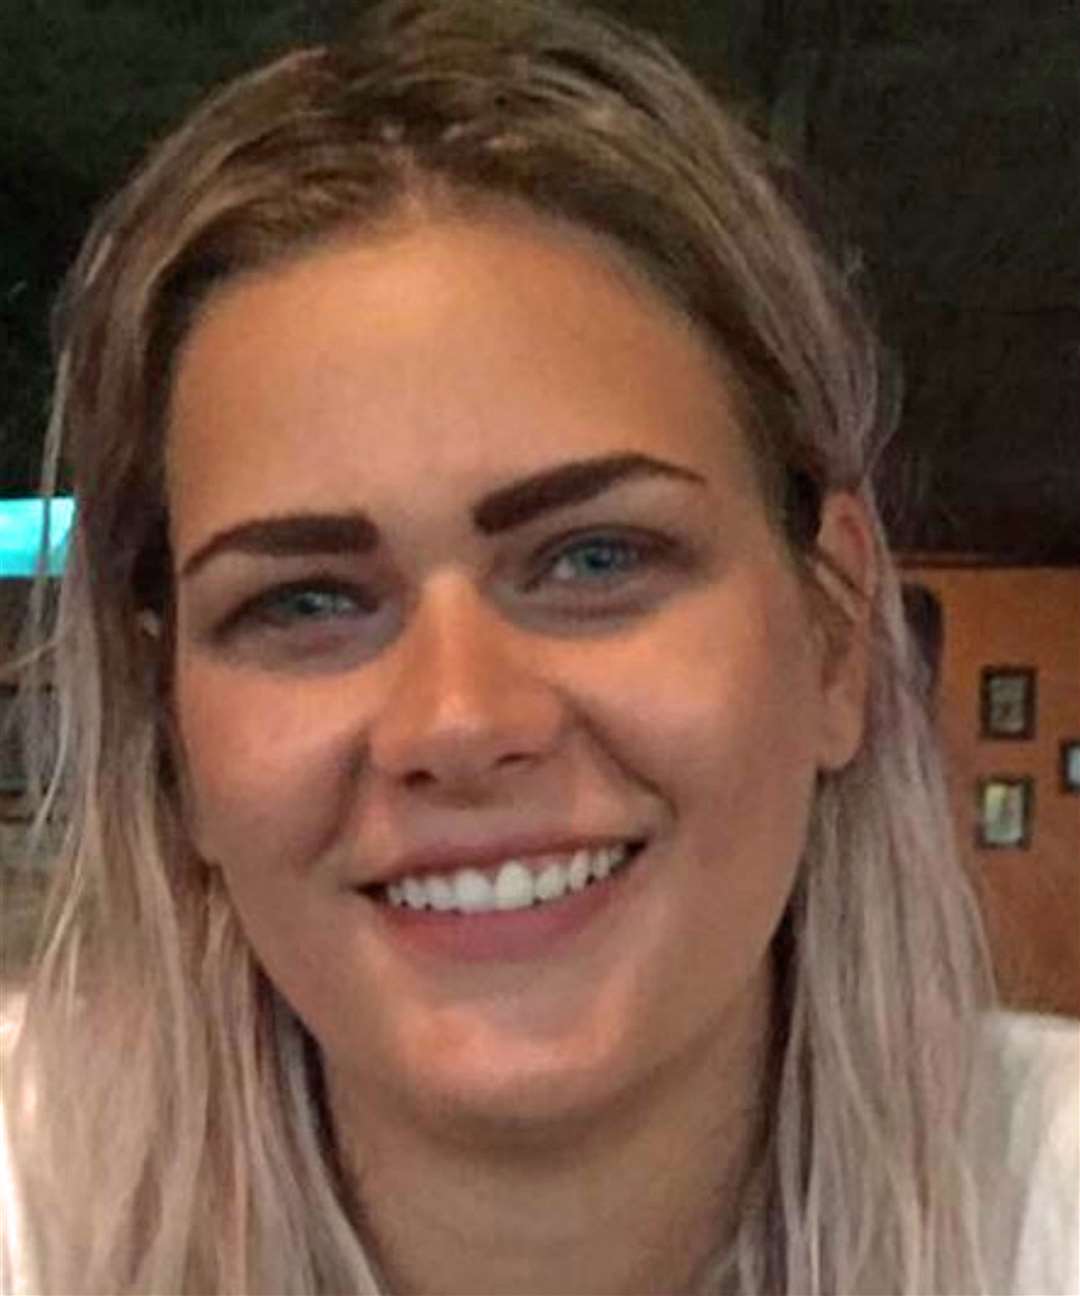 An inquest heard Bethan Roper, 28, died from head injuries when she was struck by a tree branch (British Transport Police/PA).